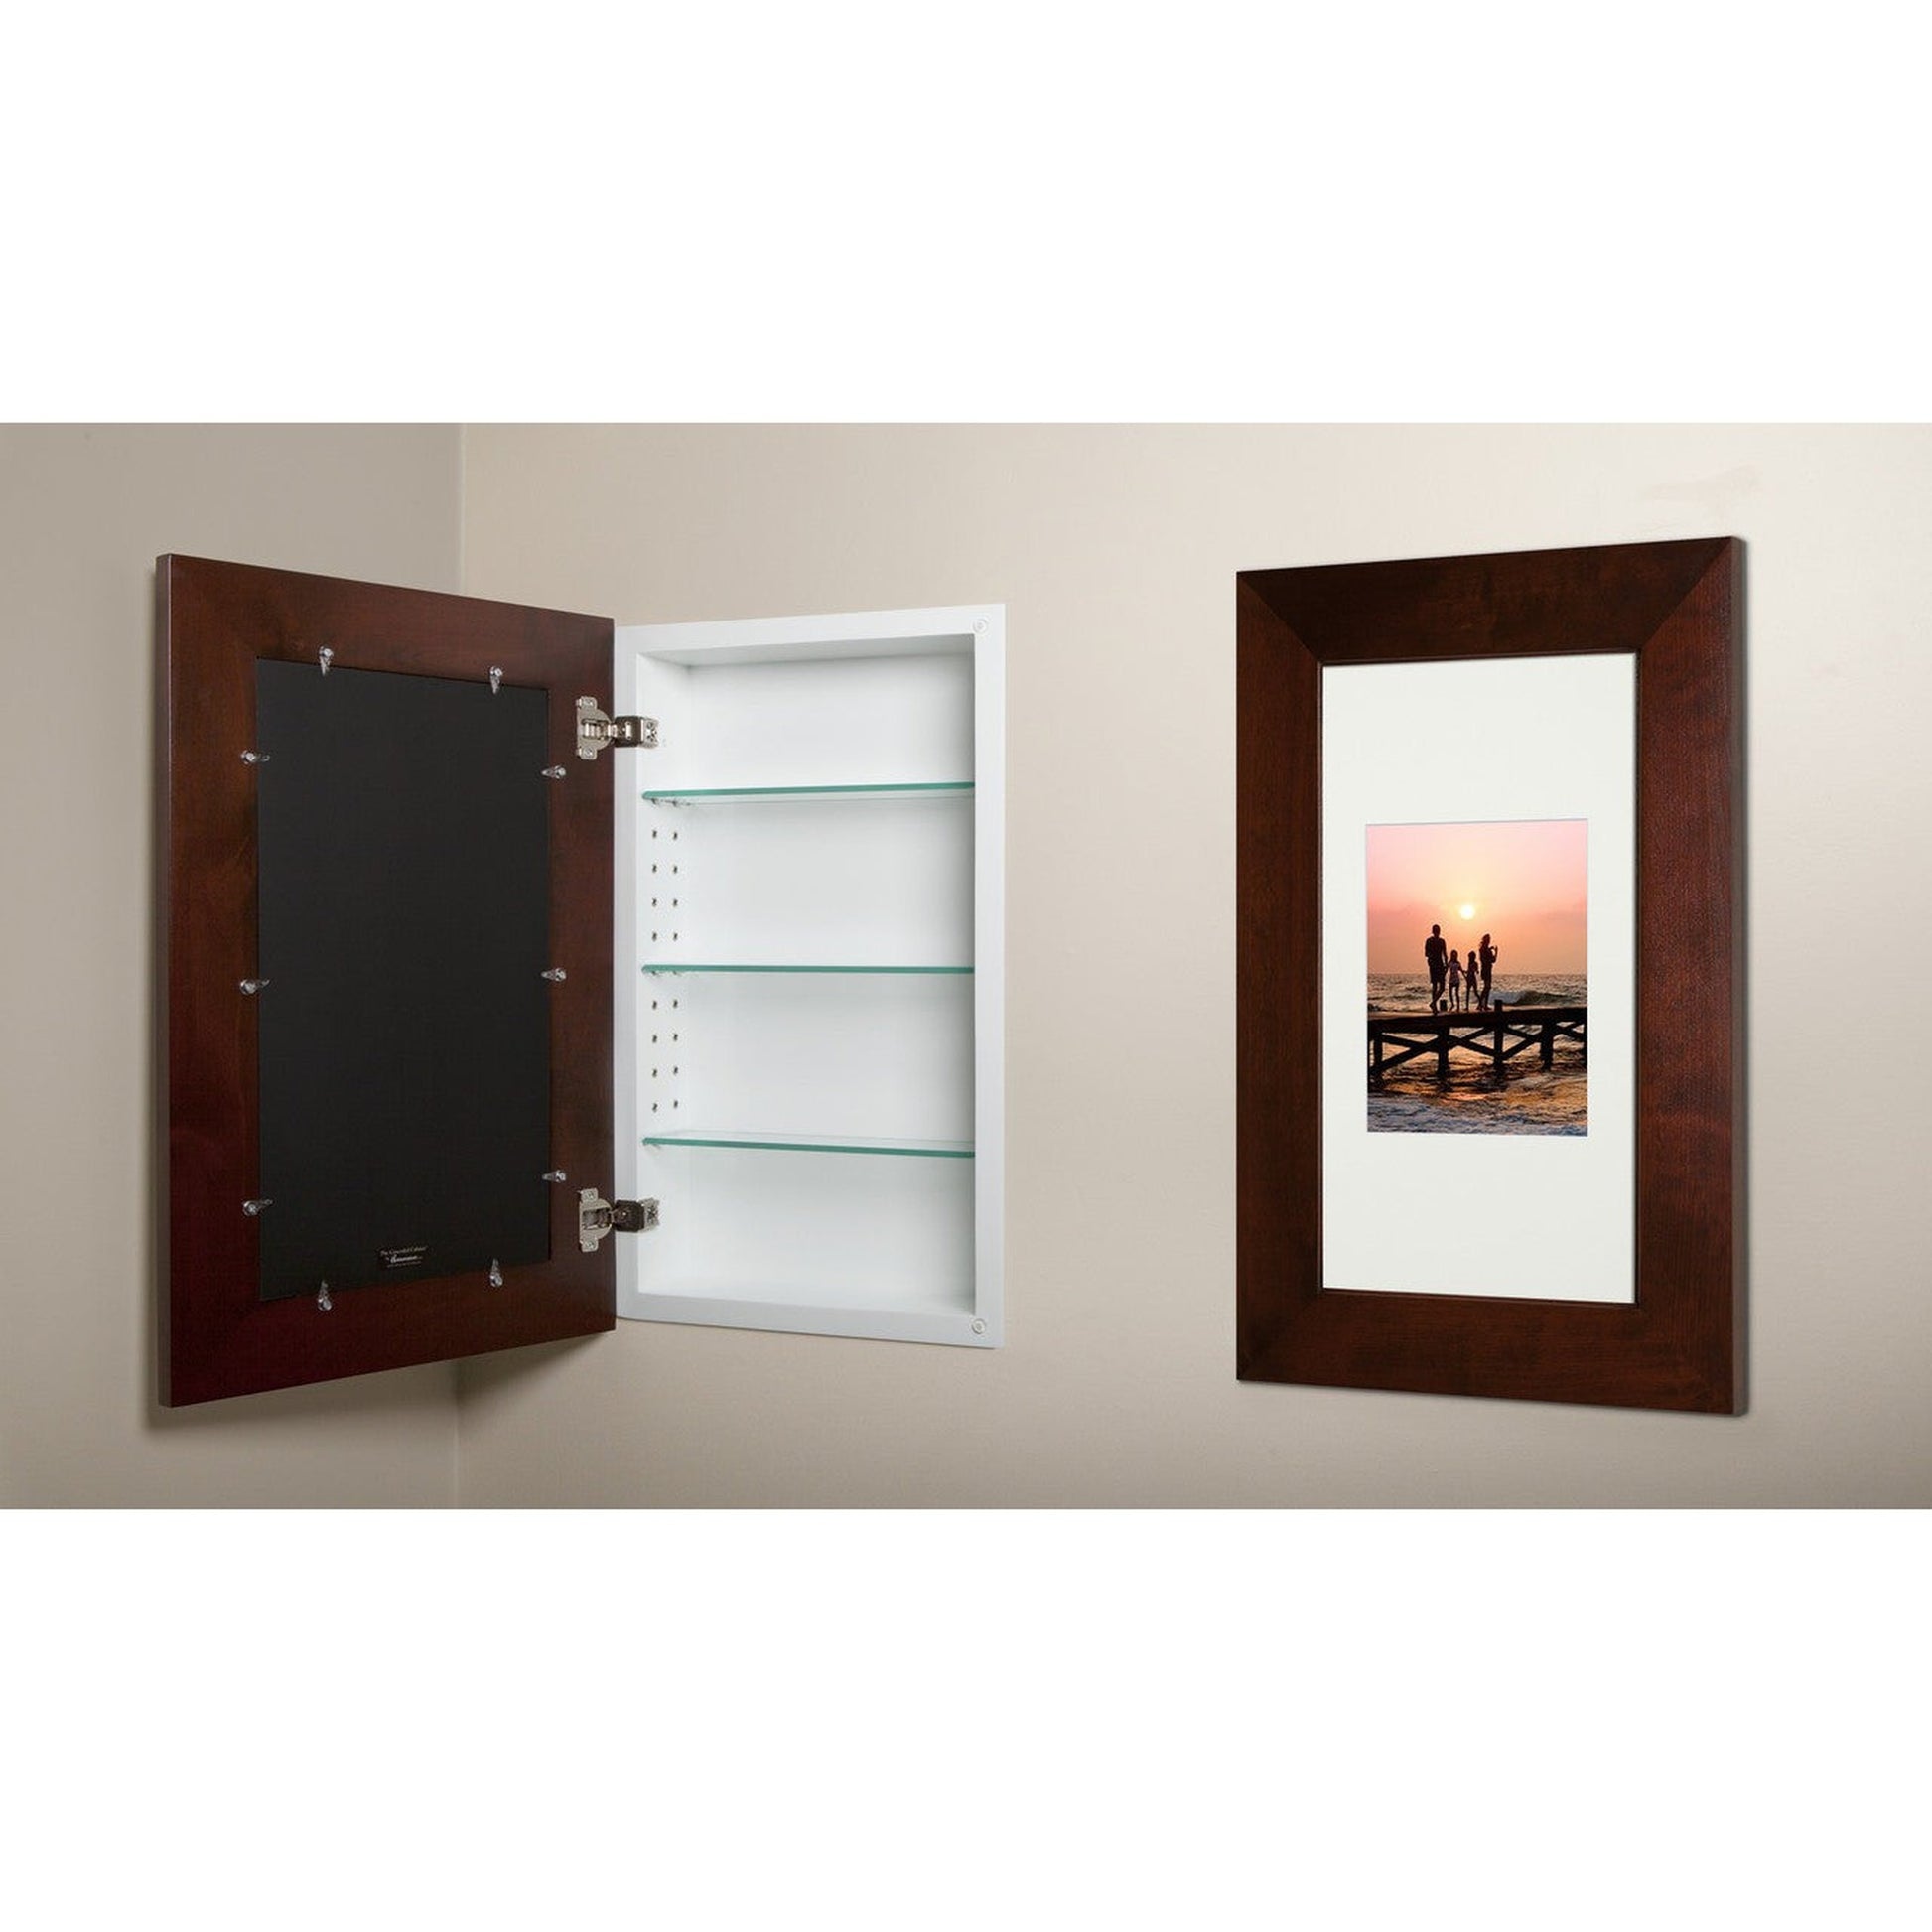 Fox Hollow Furnishings 14" x 24" Espresso Extra Large Special 6" Depth White Interior Recessed Picture Frame Medicine Cabinet With Mirror and Black Matting